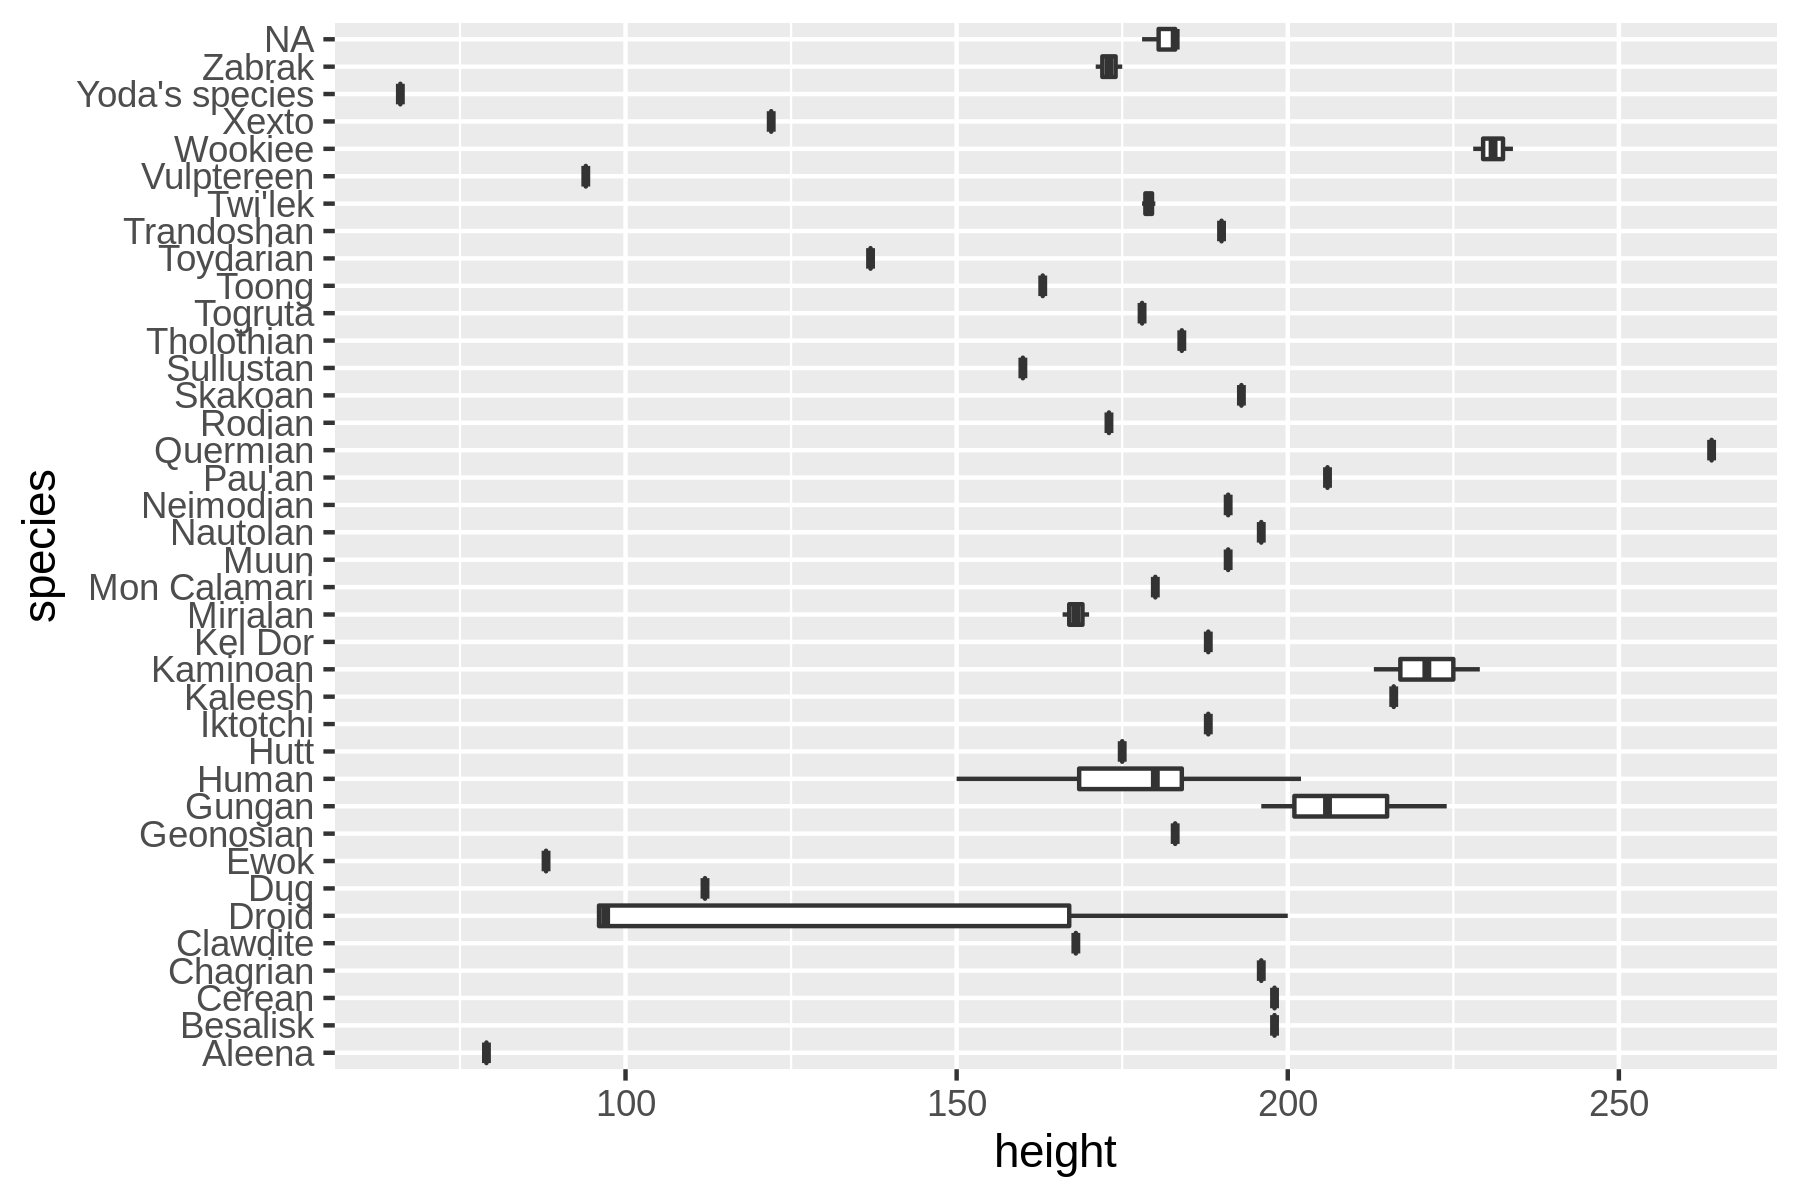 Distribution of heights per species in Star Wars